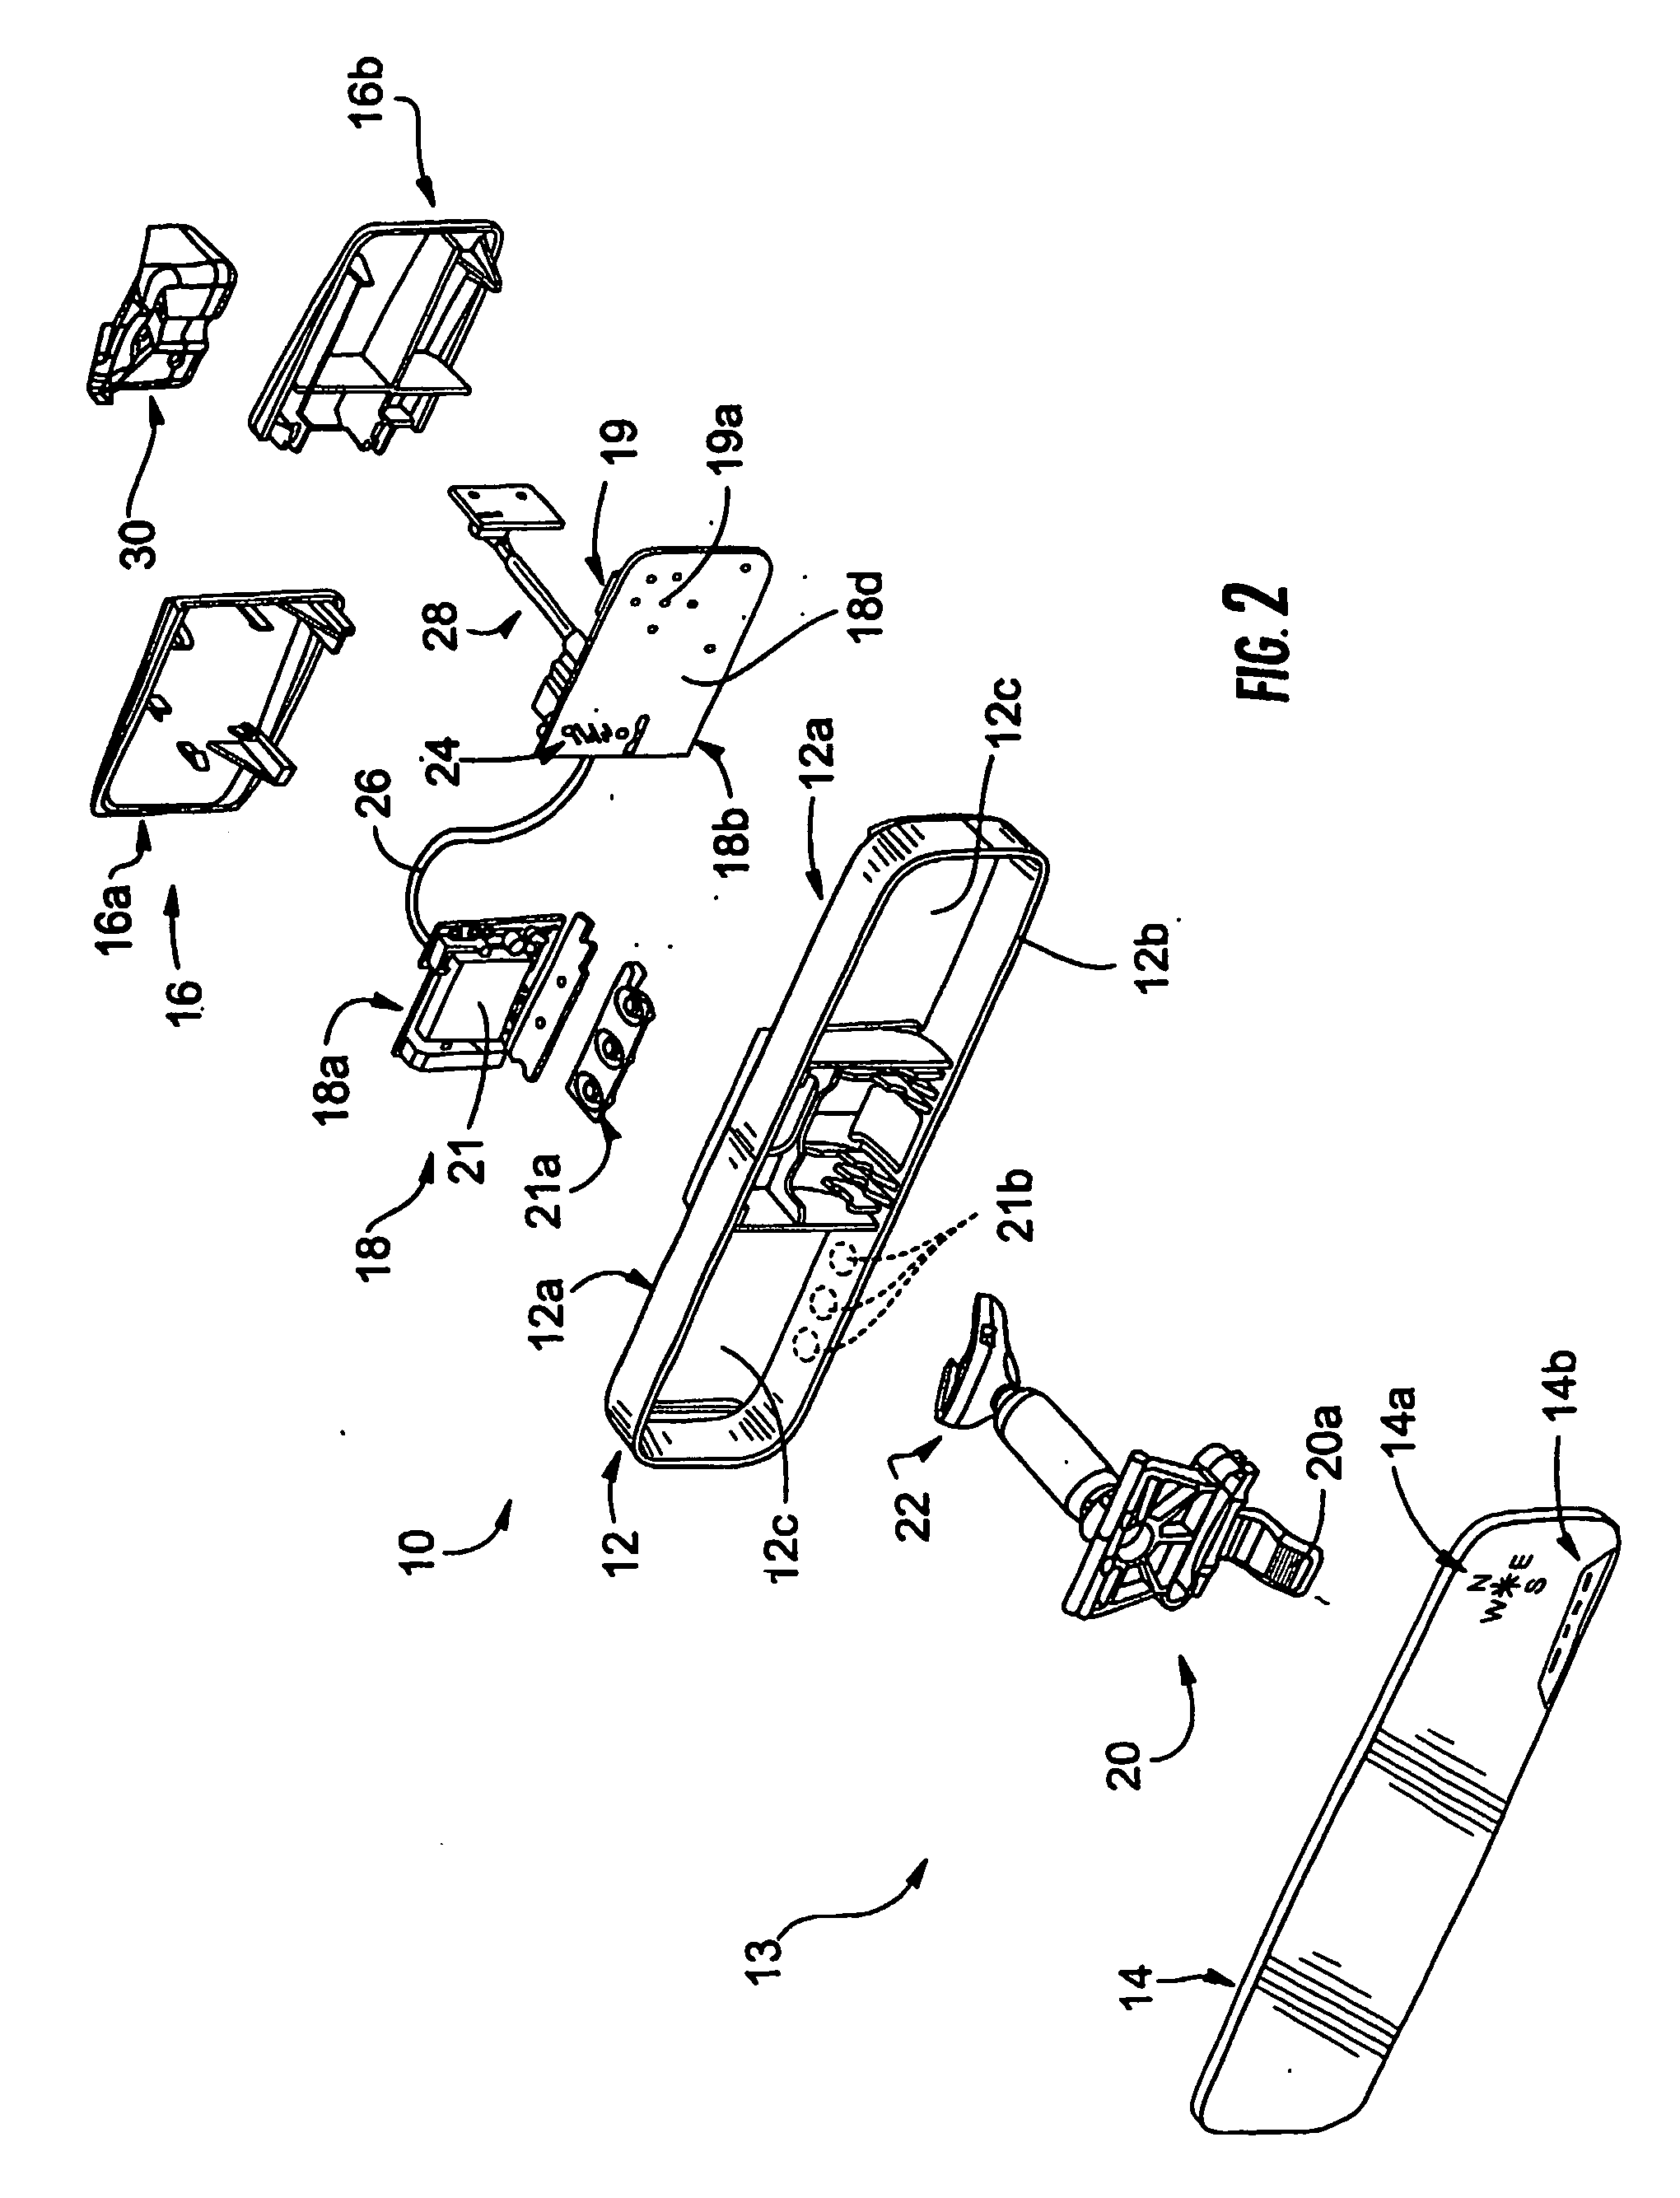 Mirror assembly for vehicle